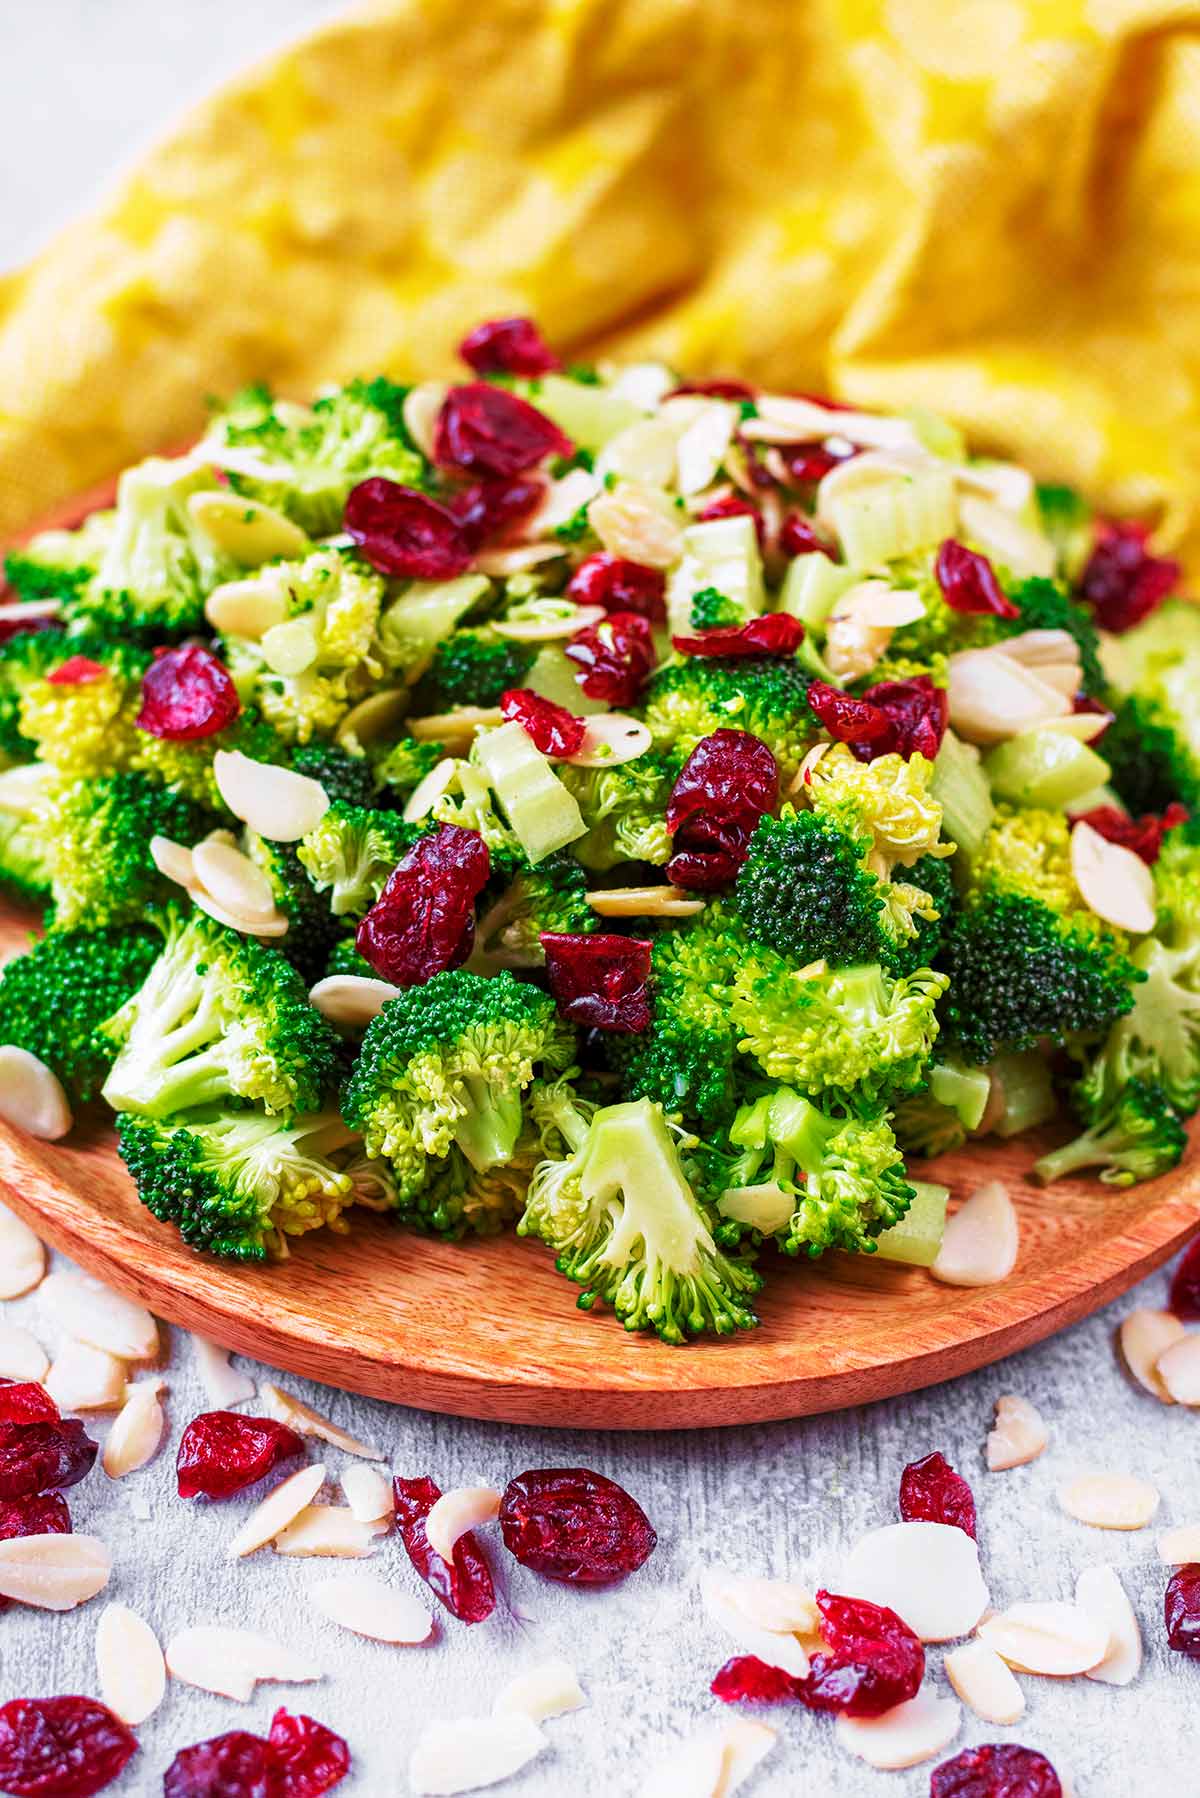 A wooden plate with a big pile of broccoli florets, cranberries and almond flakes.